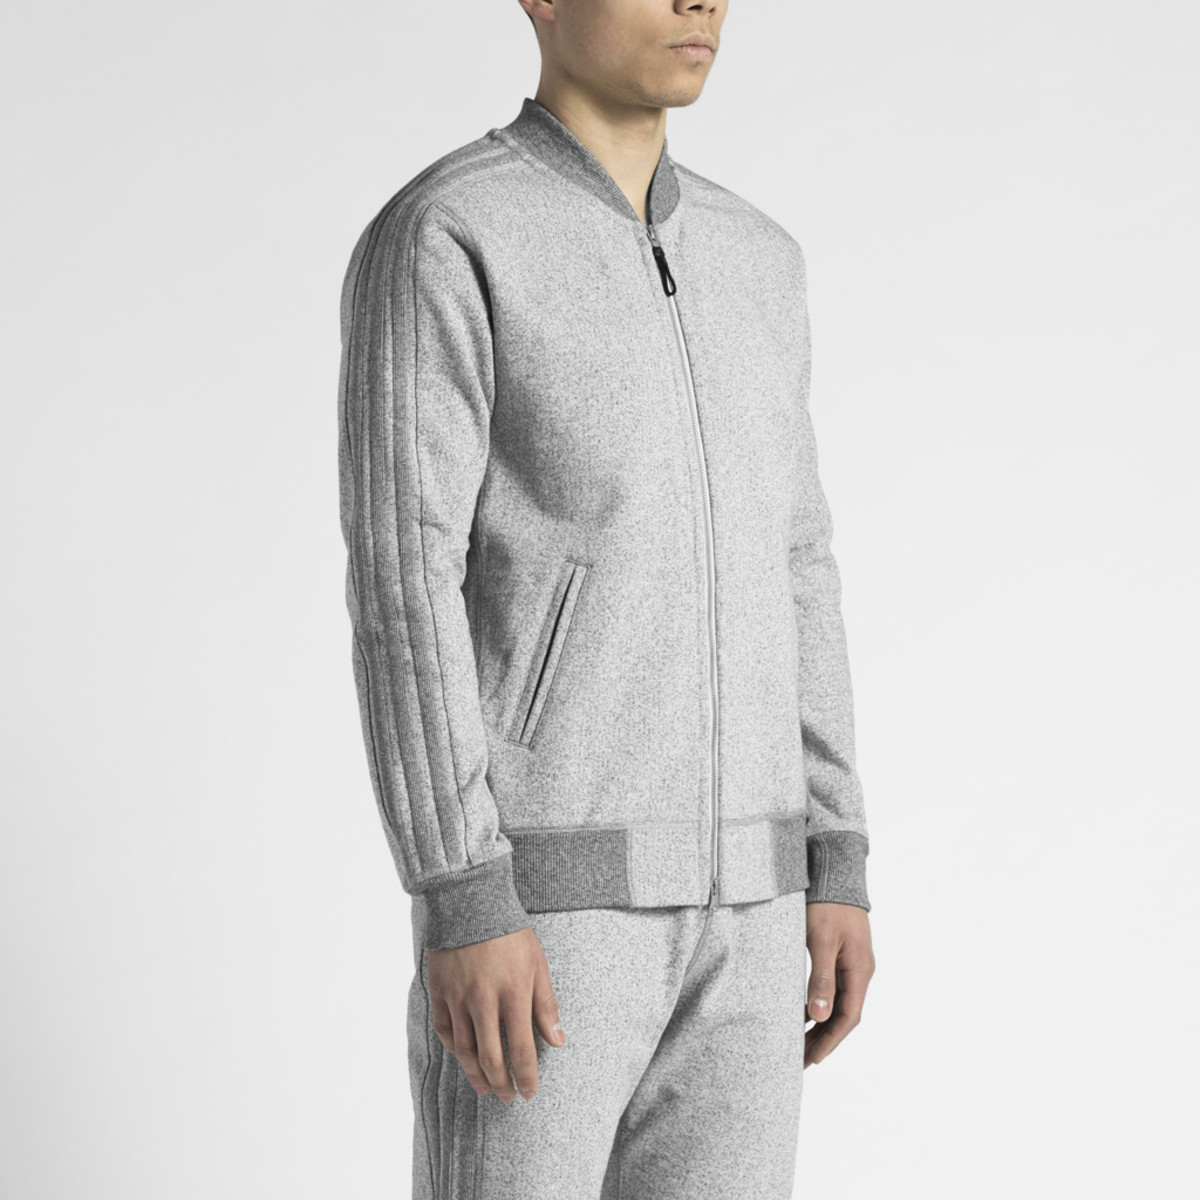 Reigning Champ x Adidas Made in Canada Collection